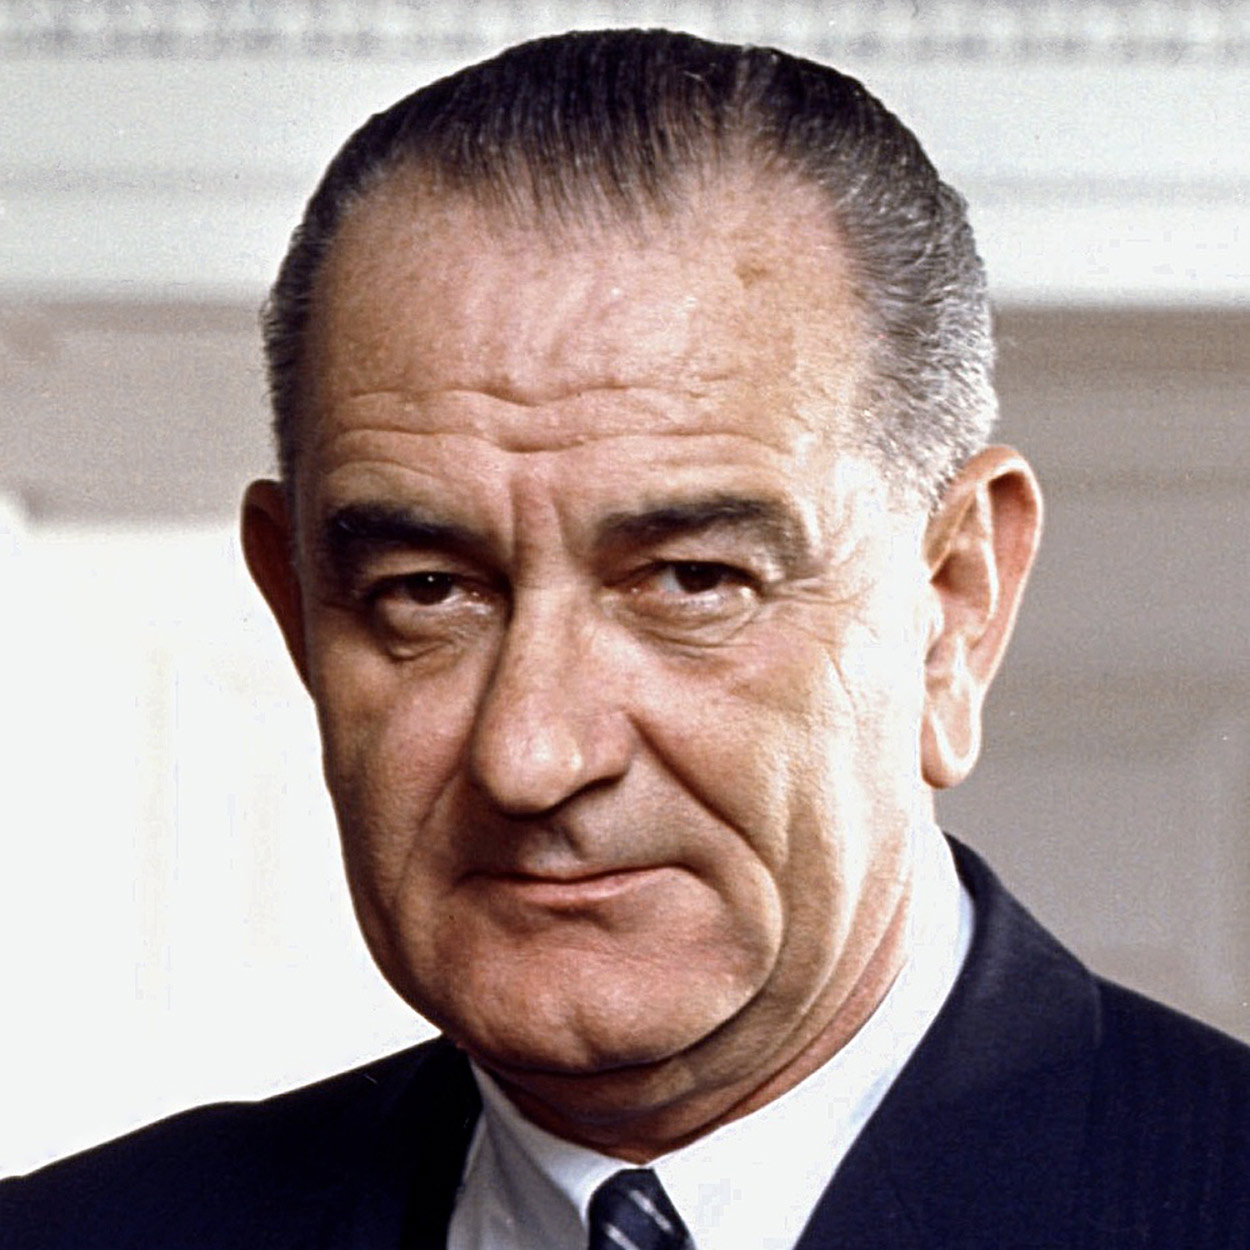 Portrait of Lyndon B. Johnson, the 36th President of the United States